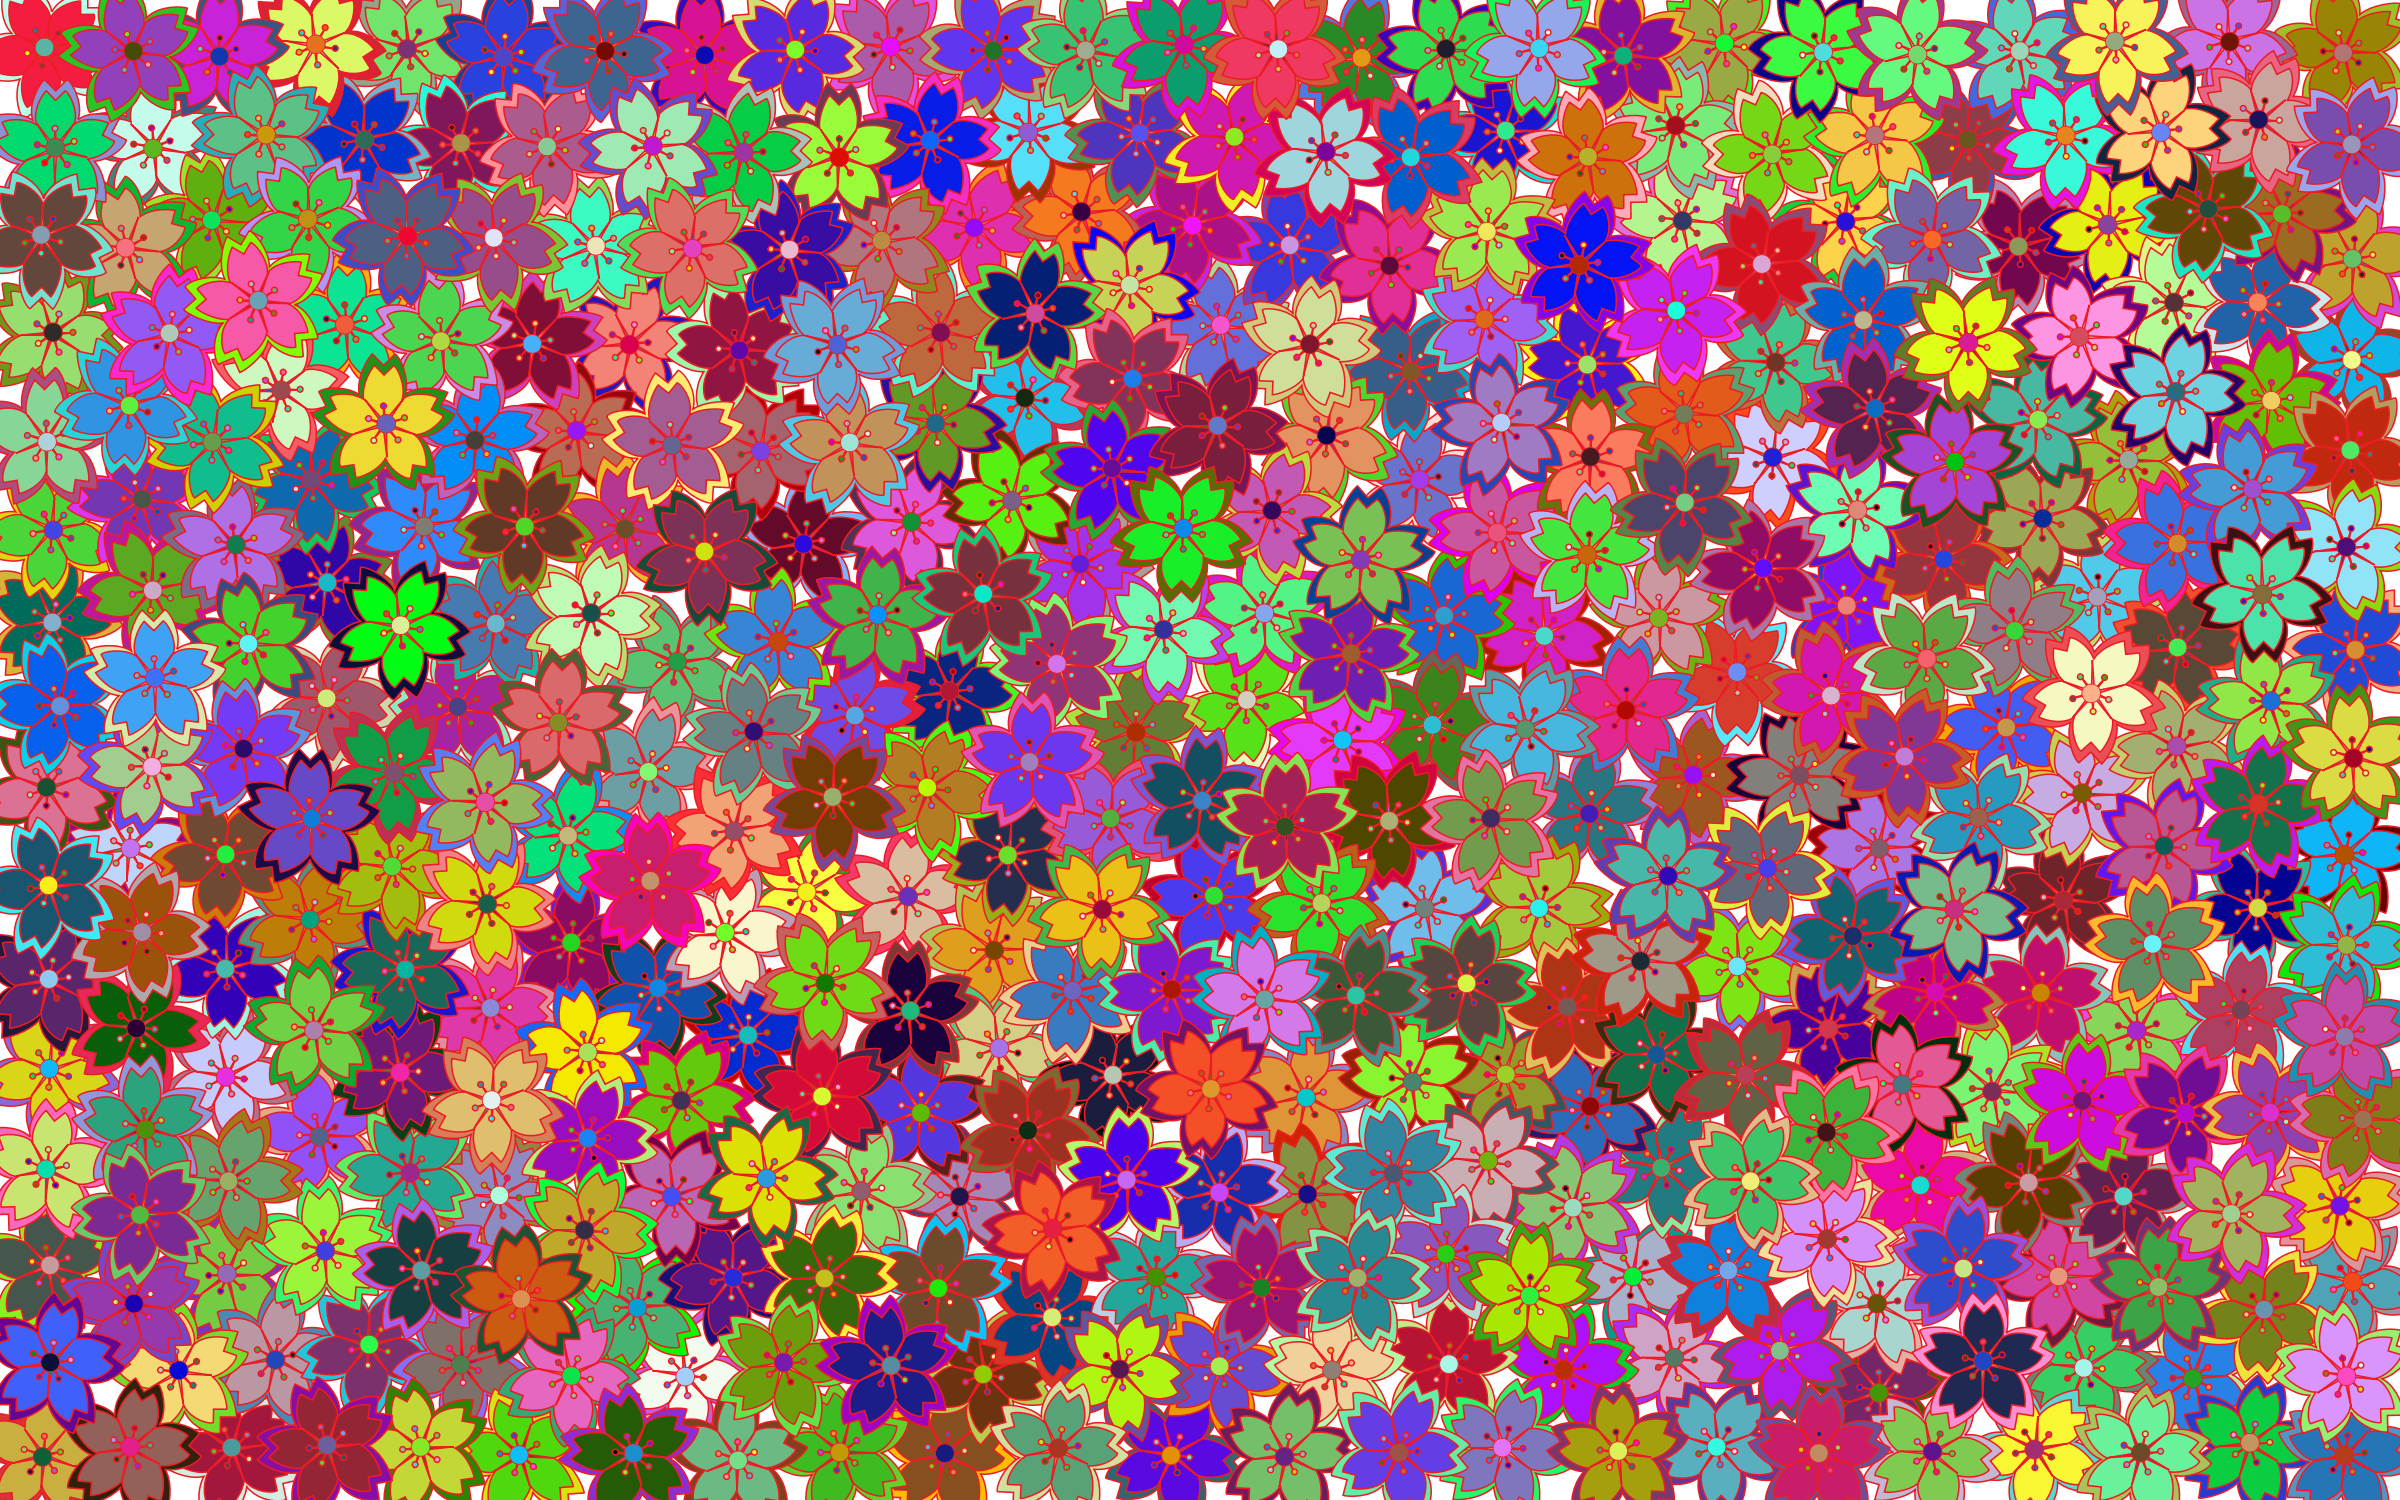 glitter clipart cool background